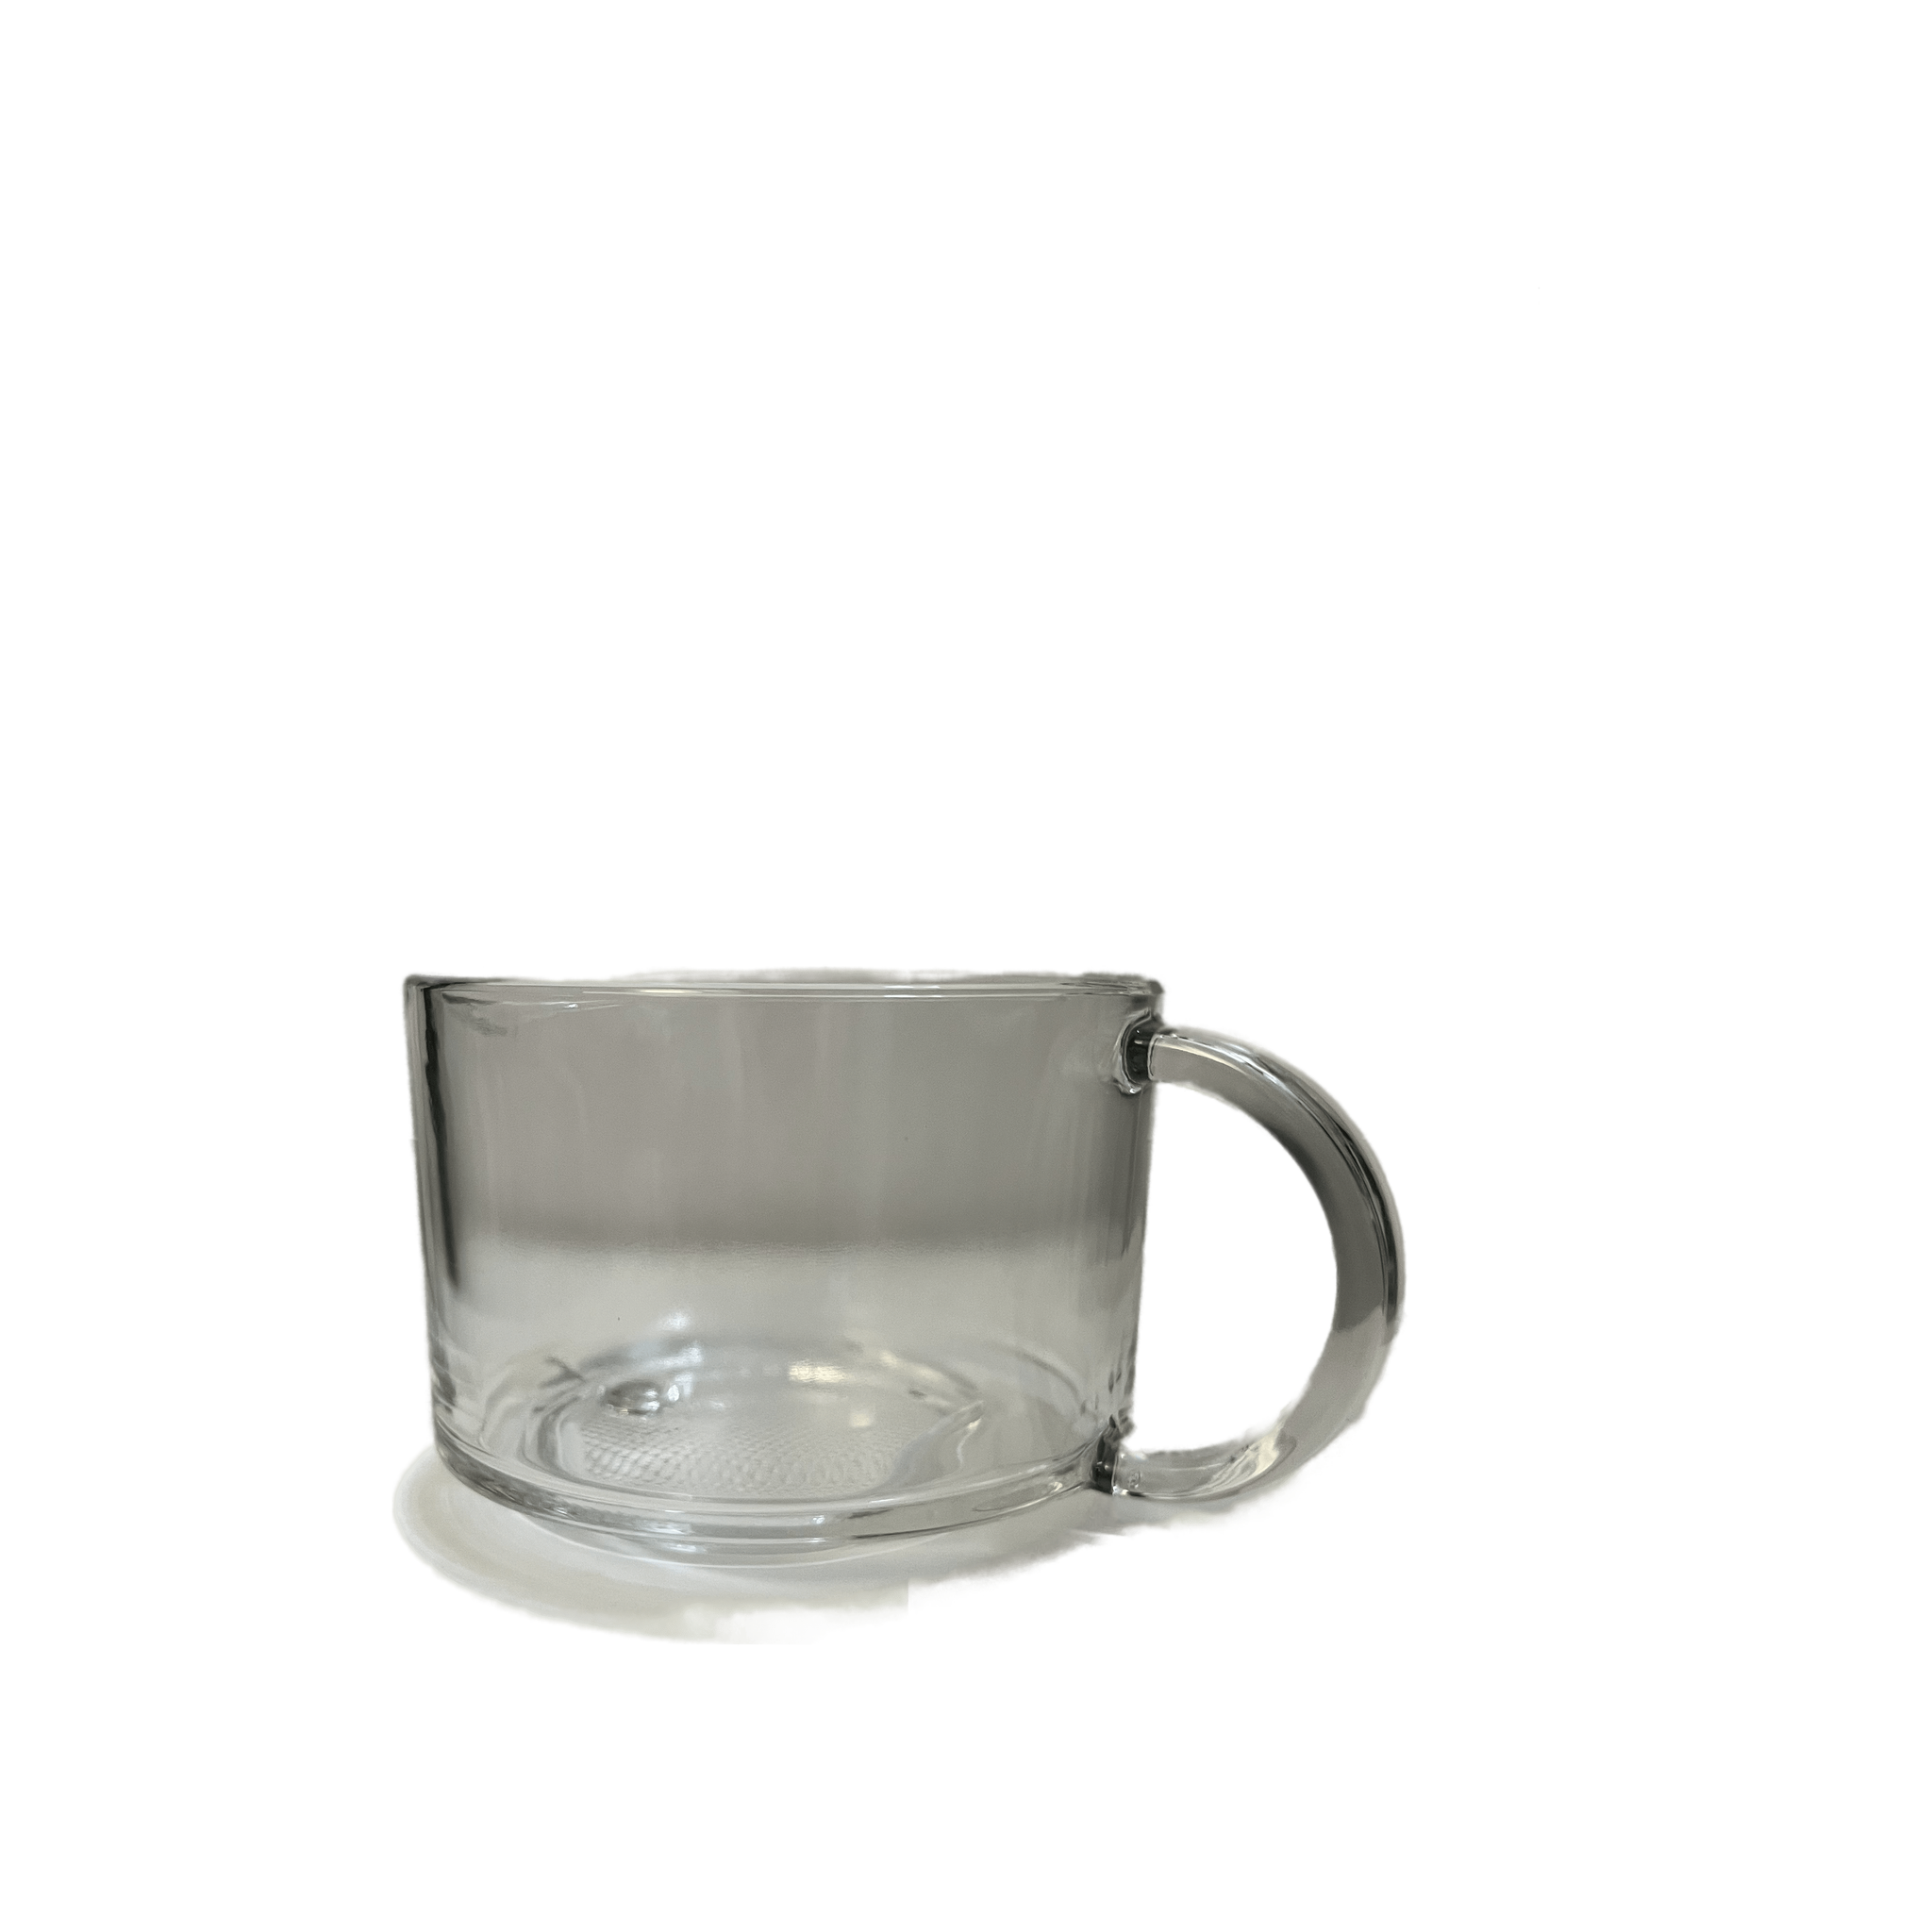 Joyoung Y828 glass cup